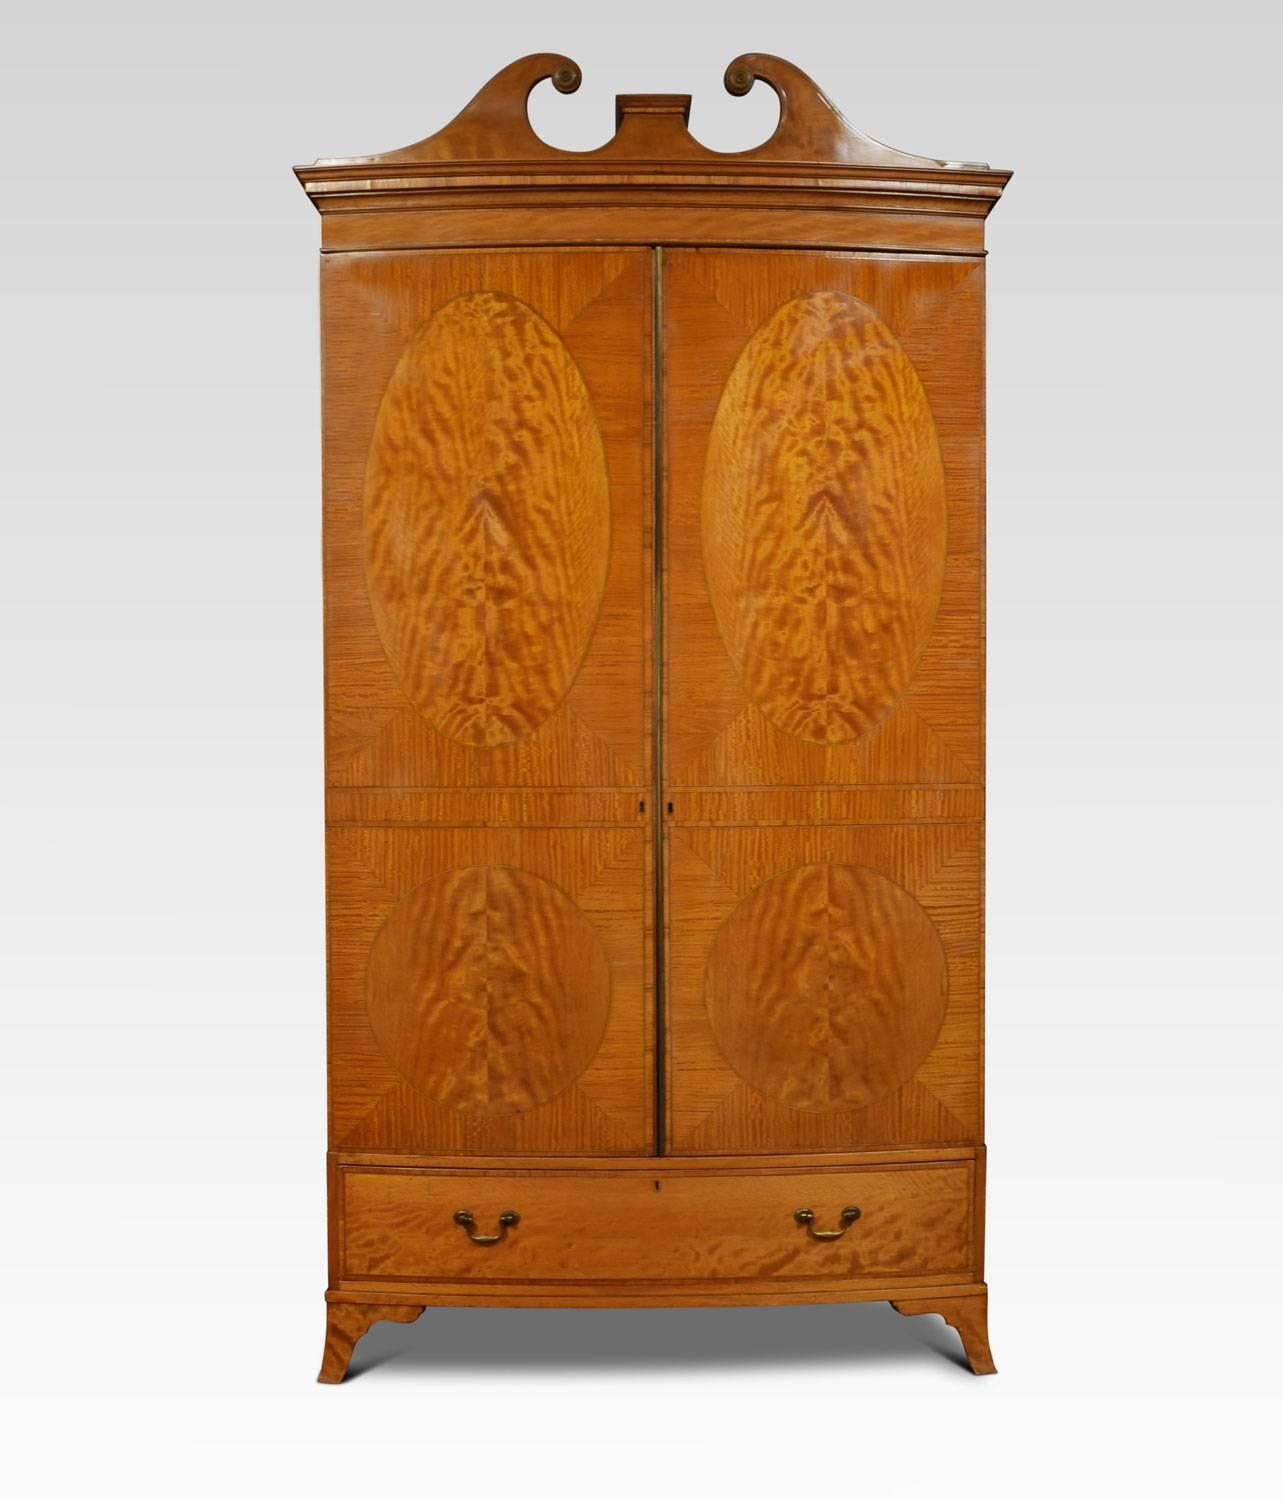 Satinwood two-door wardrobe with raised swan neck pediment above two well figured panelled doors, opening to reveal large hanging area. The base section fitted with one long drawer with brass handles. All raised up on bracket feet. The wardrobe can